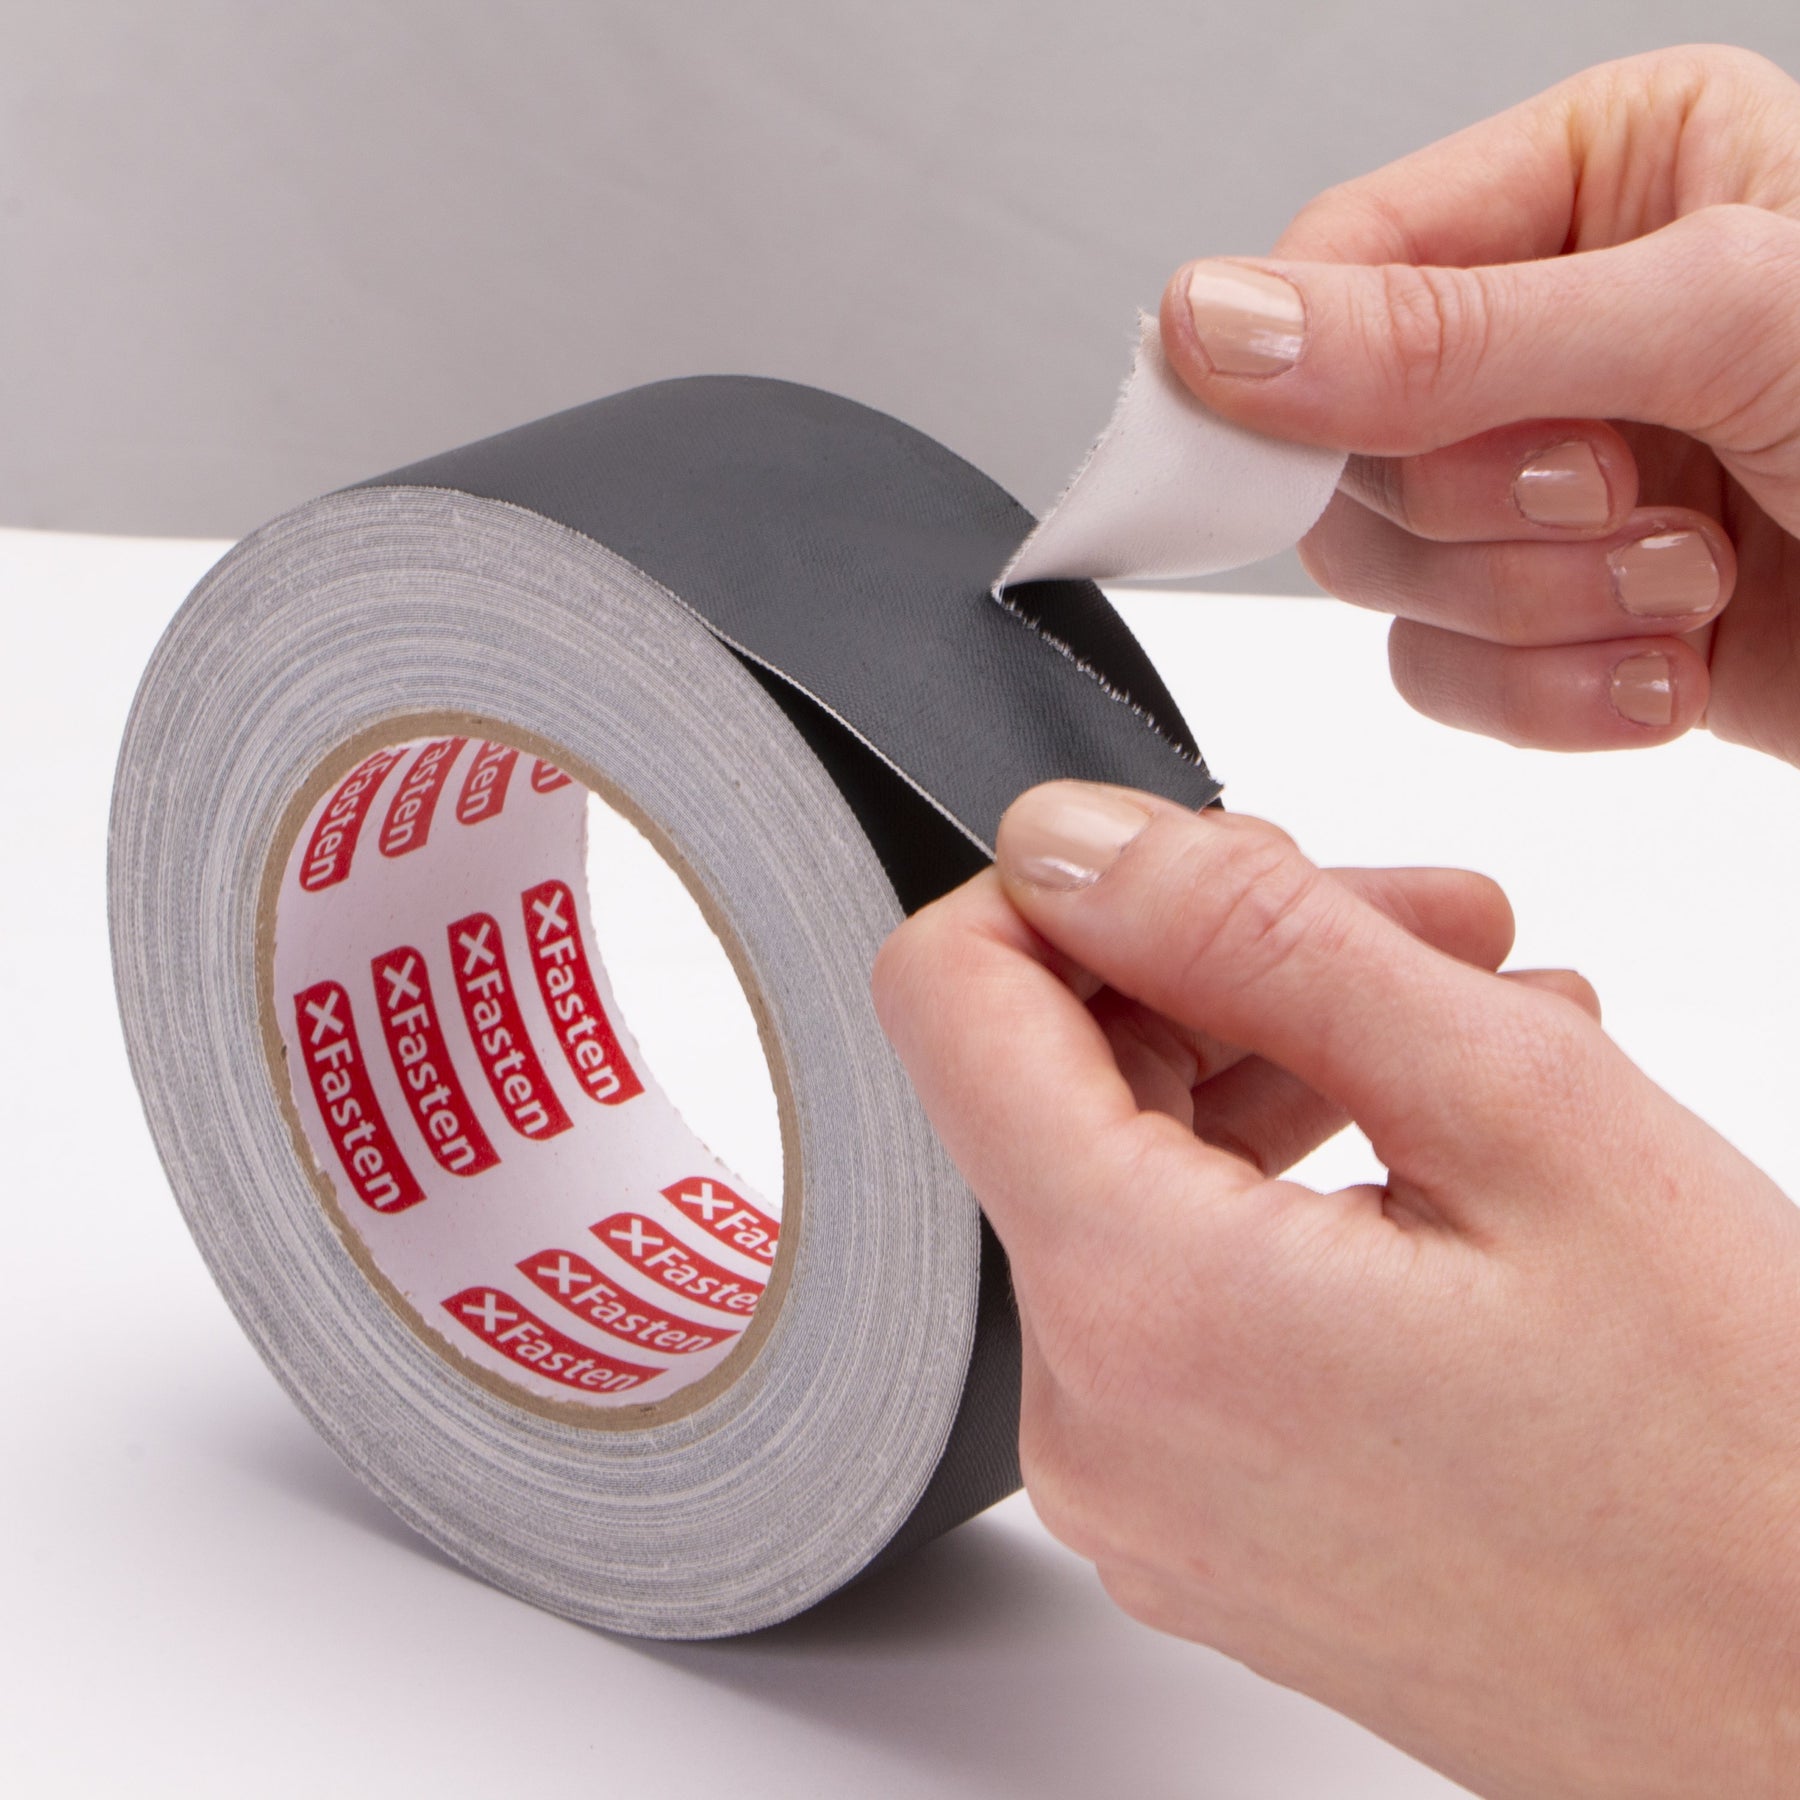 What is a Gaffer Tape and Why Do You Need It as a Professional? - XFasten